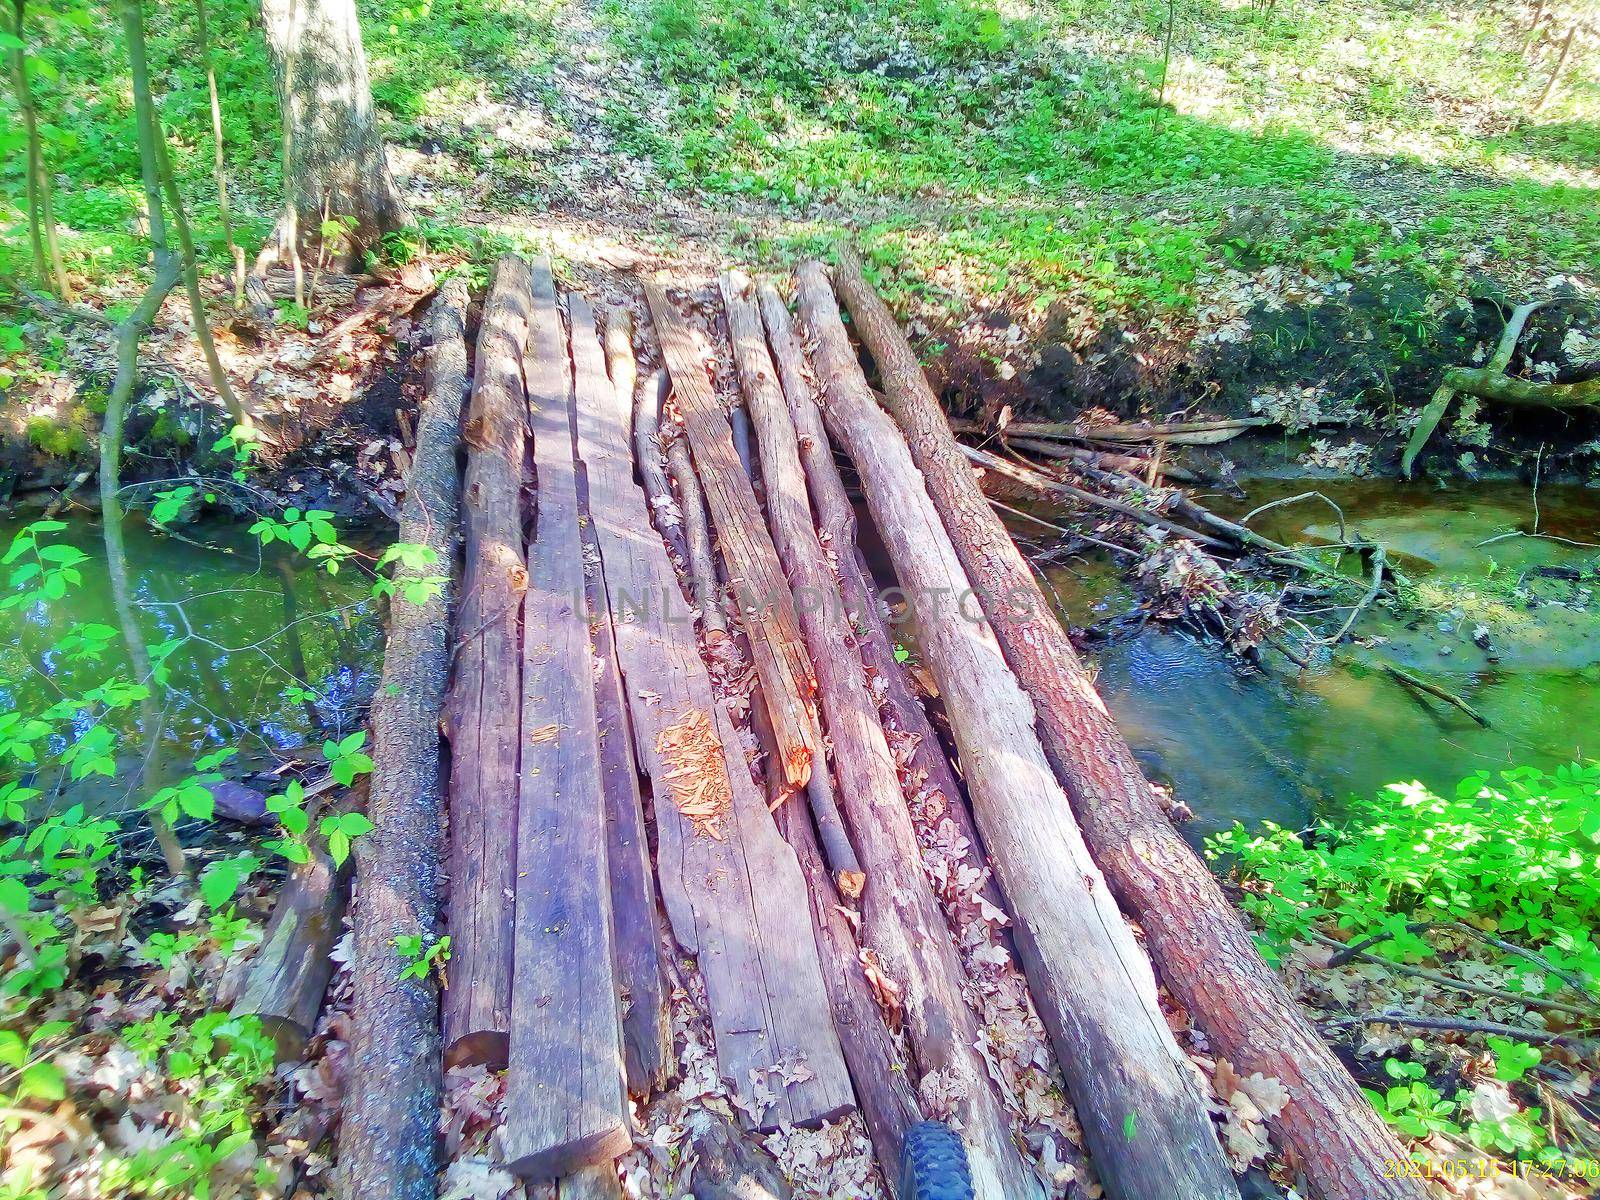 An old log bridge without a parapet over a small stream in the woods on image